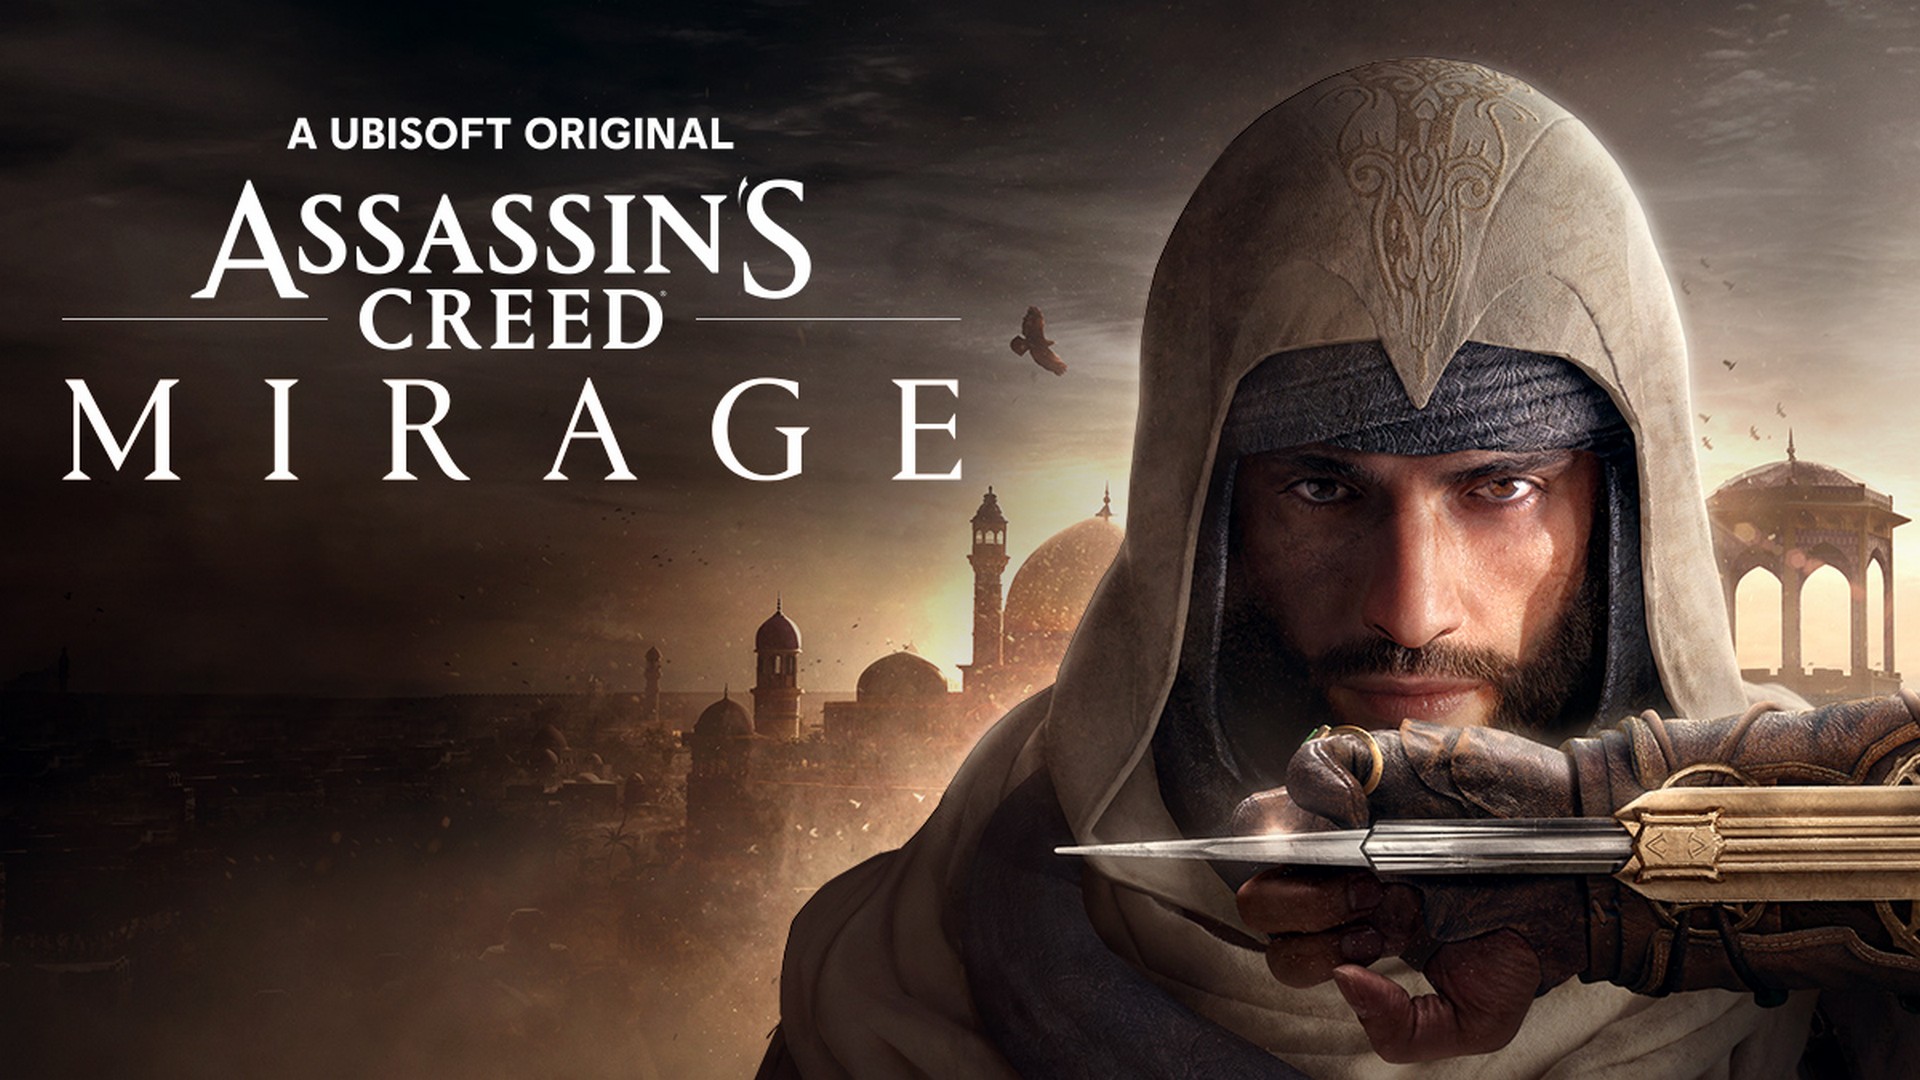 Become A Master Assassin In Assassin's Creed Mirage